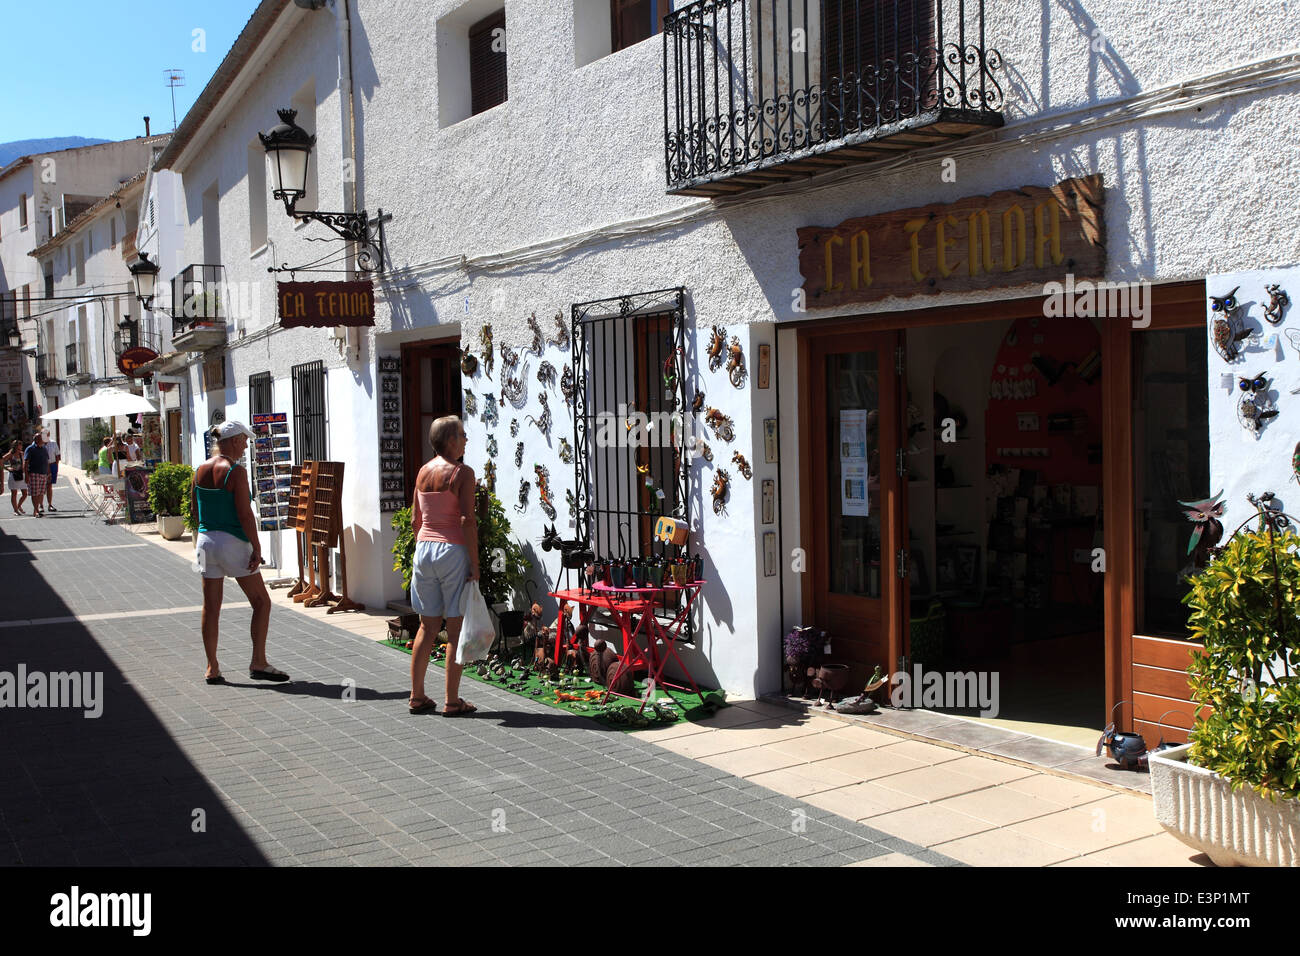 Shops with gifts at Guadalest medival village, Sierrade Aitana mountains, Costa Blanca, Spain, Europe Stock Photo